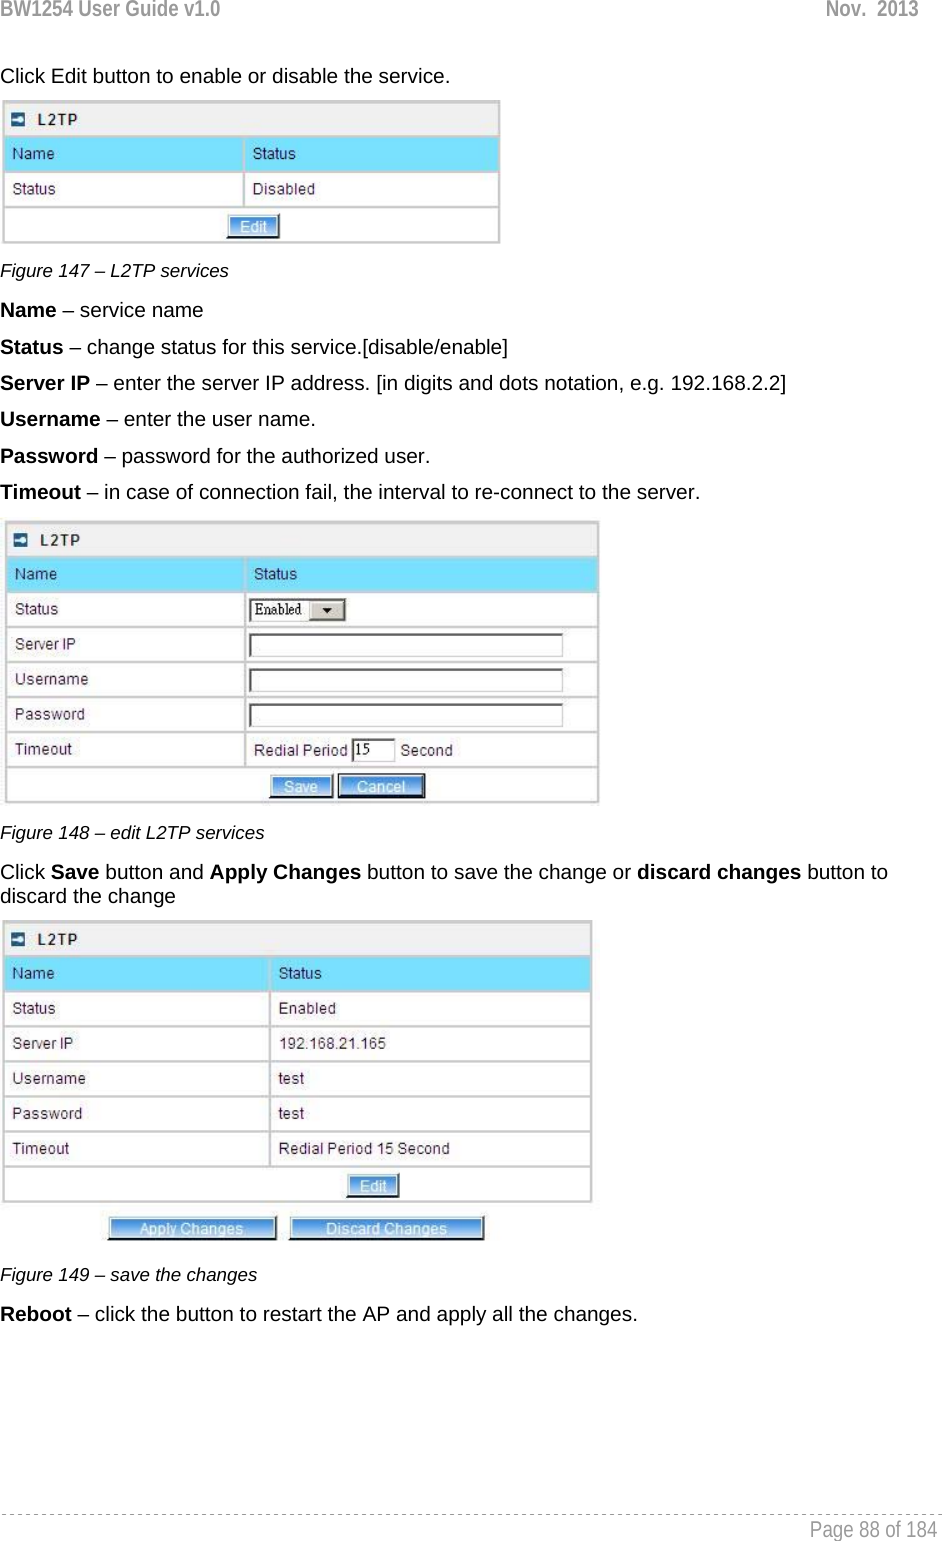 BW1254 User Guide v1.0  Nov.  2013     Page 88 of 184   Click Edit button to enable or disable the service.  Figure 147 – L2TP services Name – service name Status – change status for this service.[disable/enable] Server IP – enter the server IP address. [in digits and dots notation, e.g. 192.168.2.2] Username – enter the user name. Password – password for the authorized user. Timeout – in case of connection fail, the interval to re-connect to the server.  Figure 148 – edit L2TP services Click Save button and Apply Changes button to save the change or discard changes button to discard the change  Figure 149 – save the changes Reboot – click the button to restart the AP and apply all the changes. 